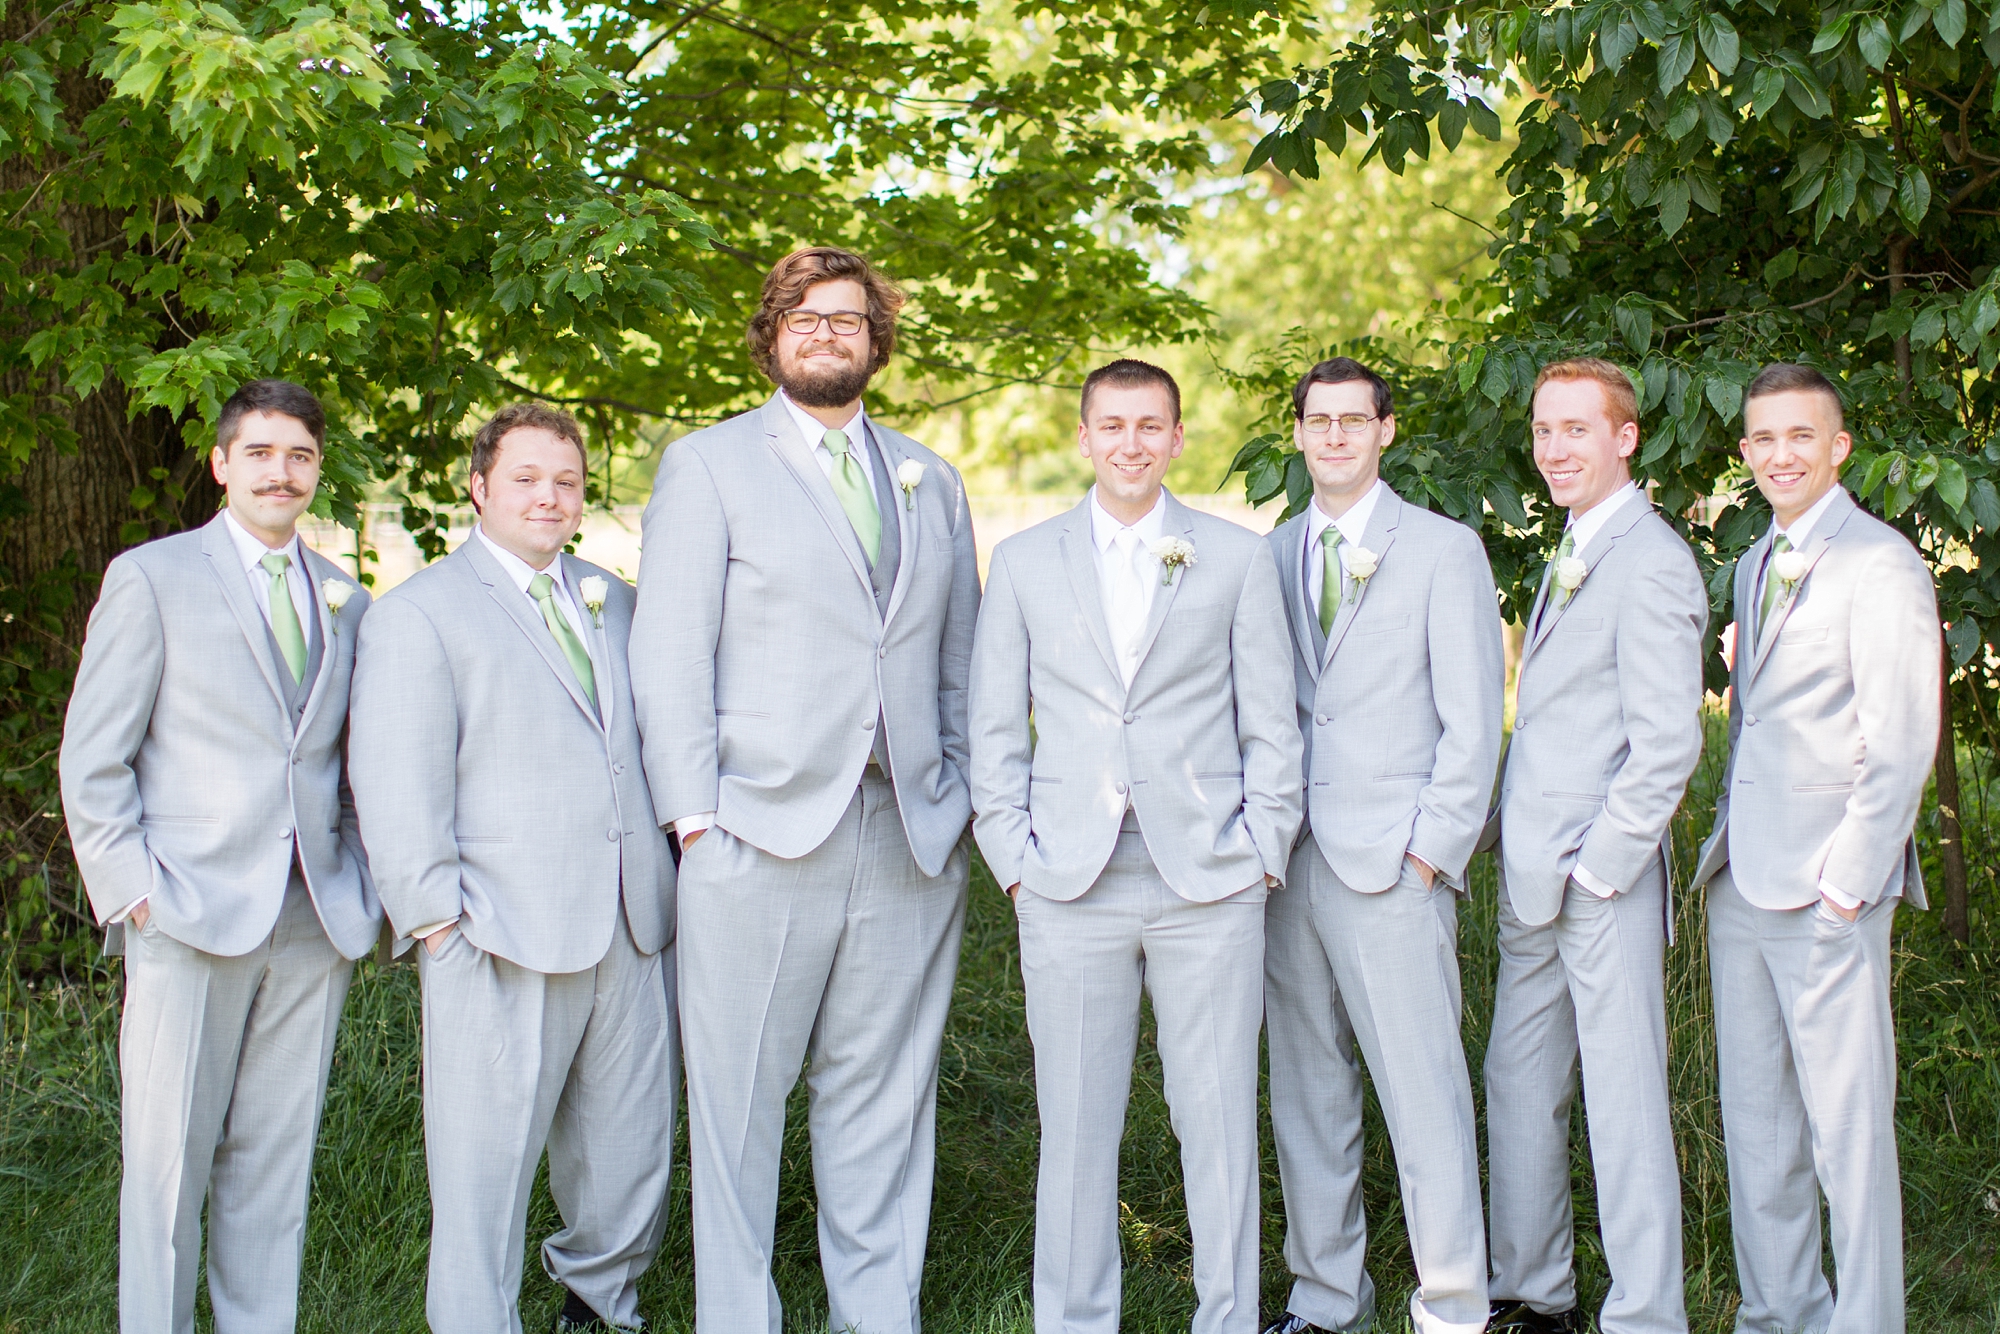 Mroz 2-Bridal Party-203_anna grace photography top of the bay maryland wedding photographer photo.jpg